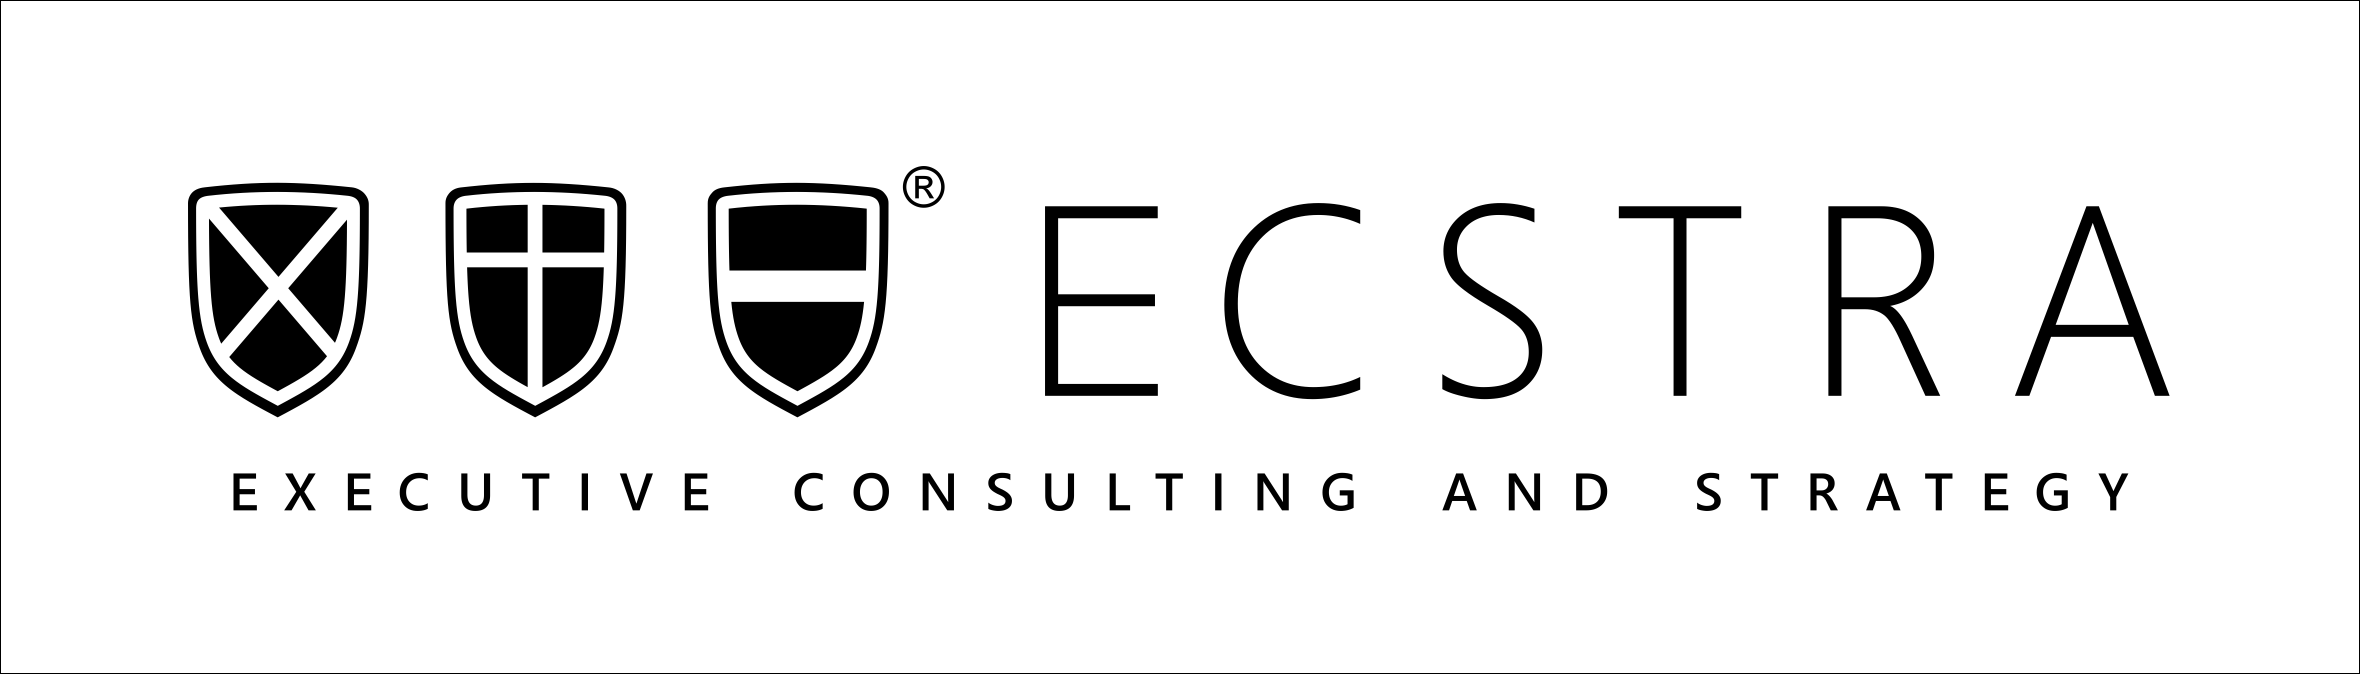 ECSTRA  Executive consulting and strategy